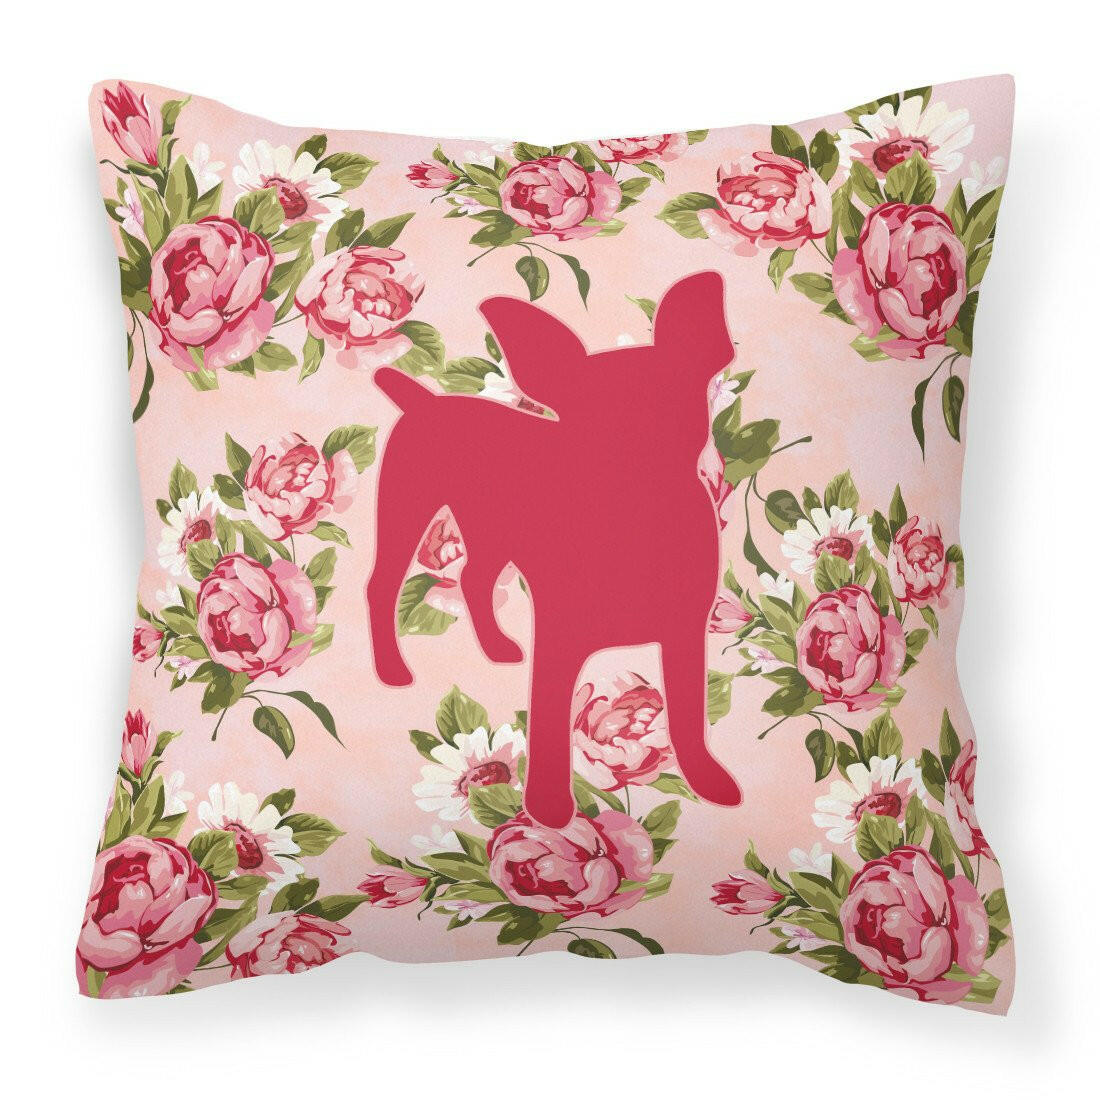 Chihuahua Shabby Chic Pink Roses  Fabric Decorative Pillow BB1108-RS-PK-PW1414 - the-store.com